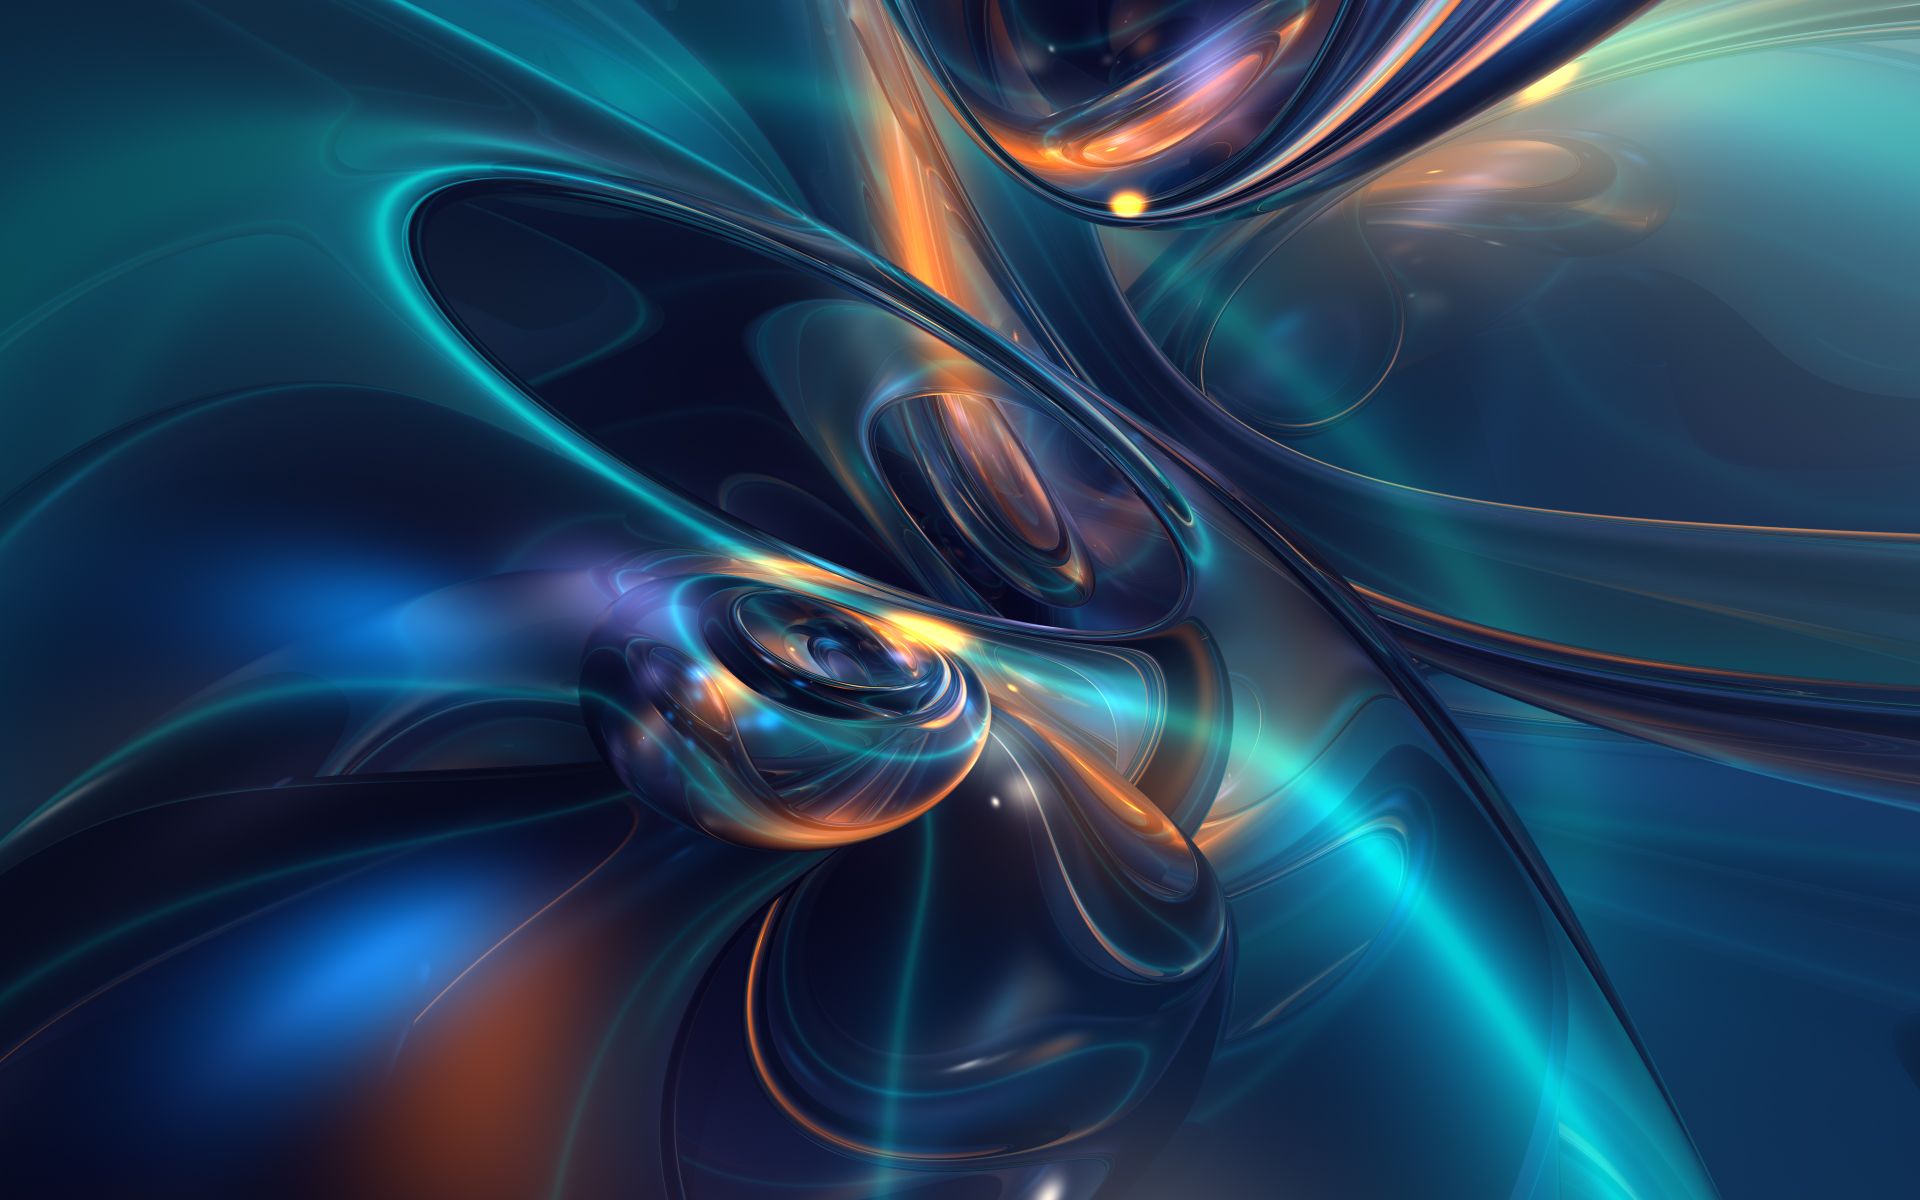 Abstract Design Wallpapers - 4k, HD Abstract Design Backgrounds on ...